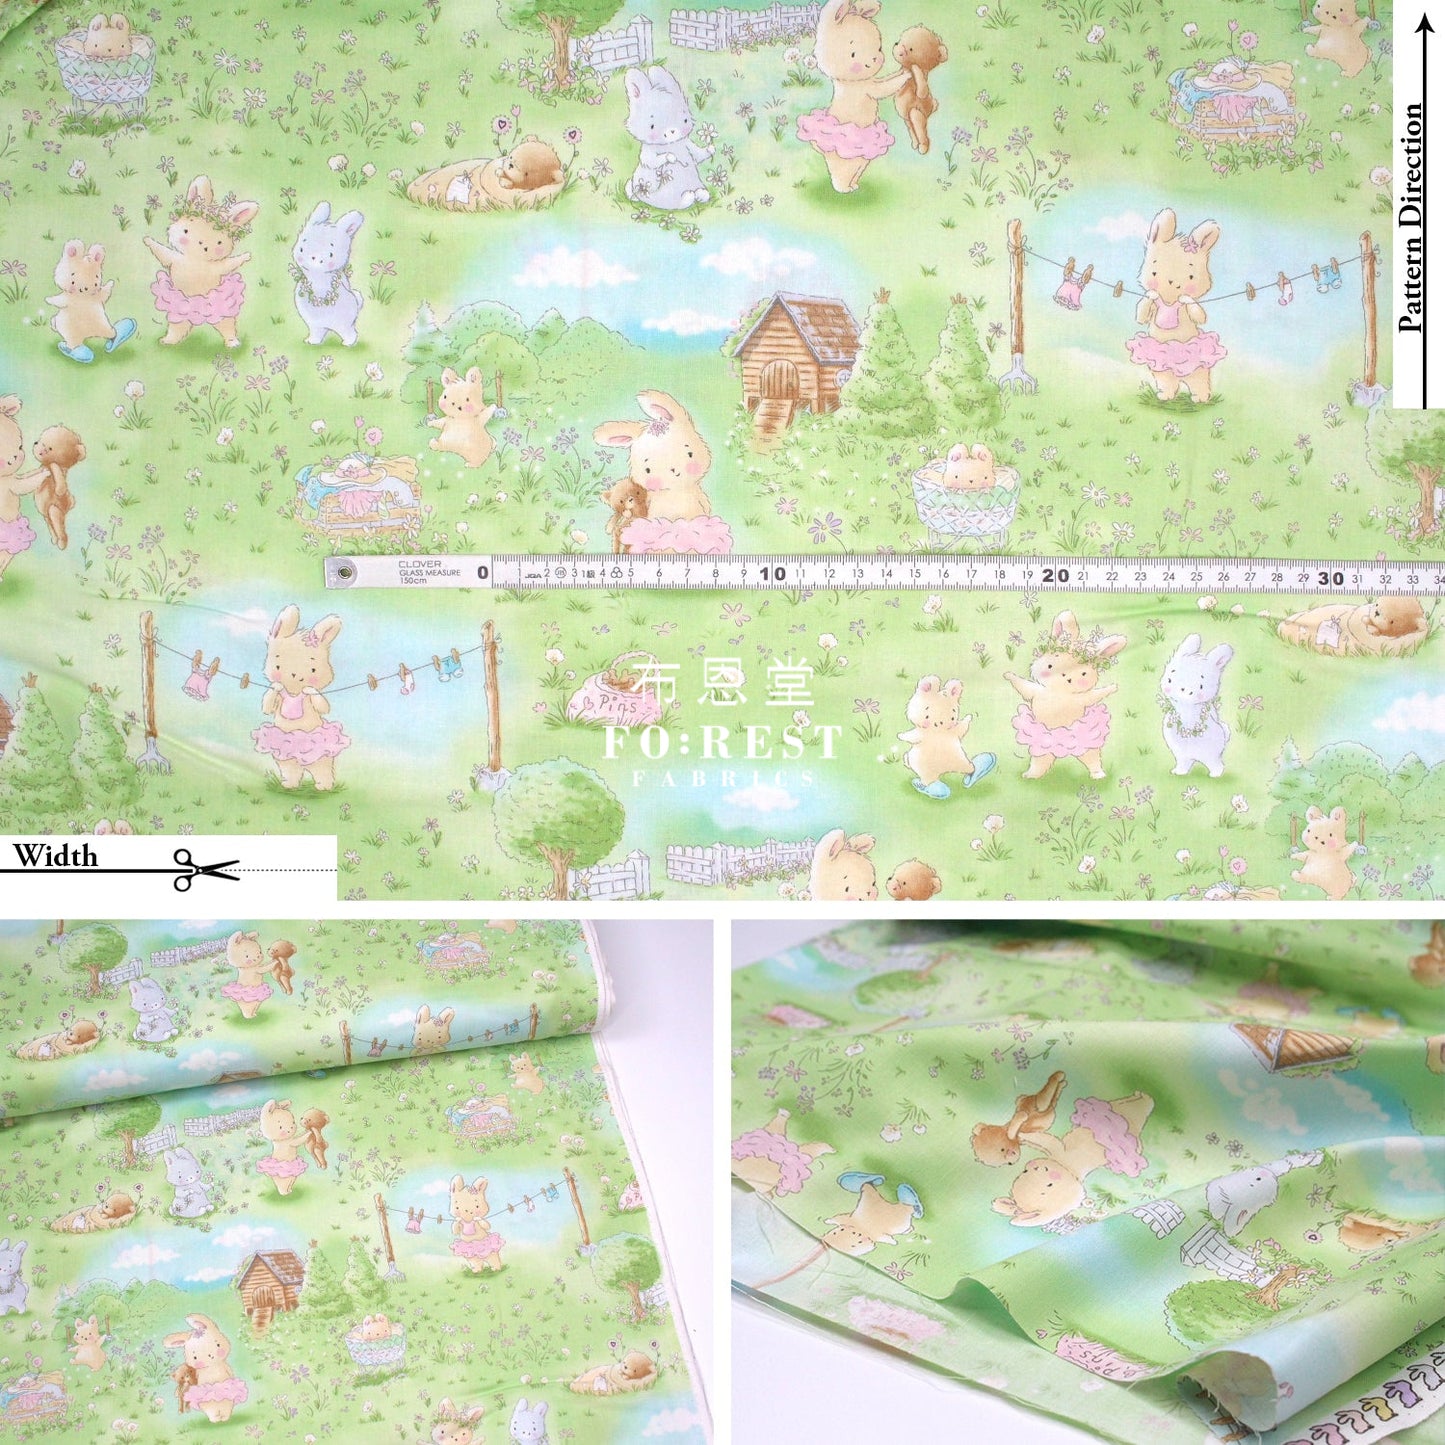 Cotton - Bunny In The Meadow Fabric